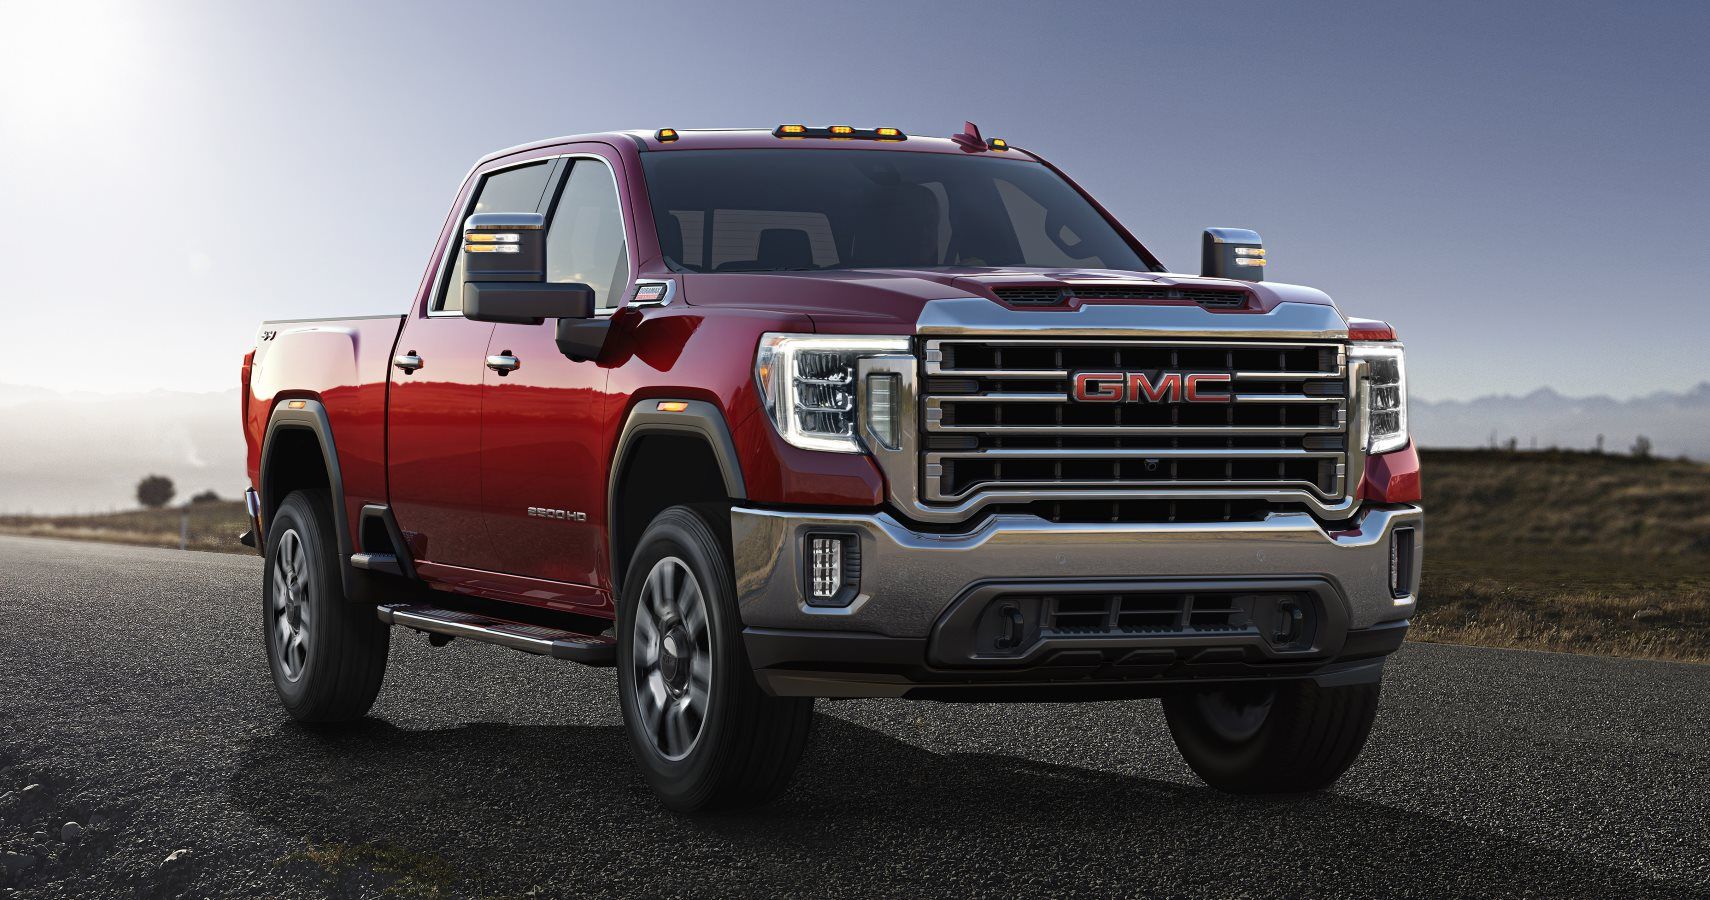 Gmc Reveals 2020 Sierra Hd With Revised Front End